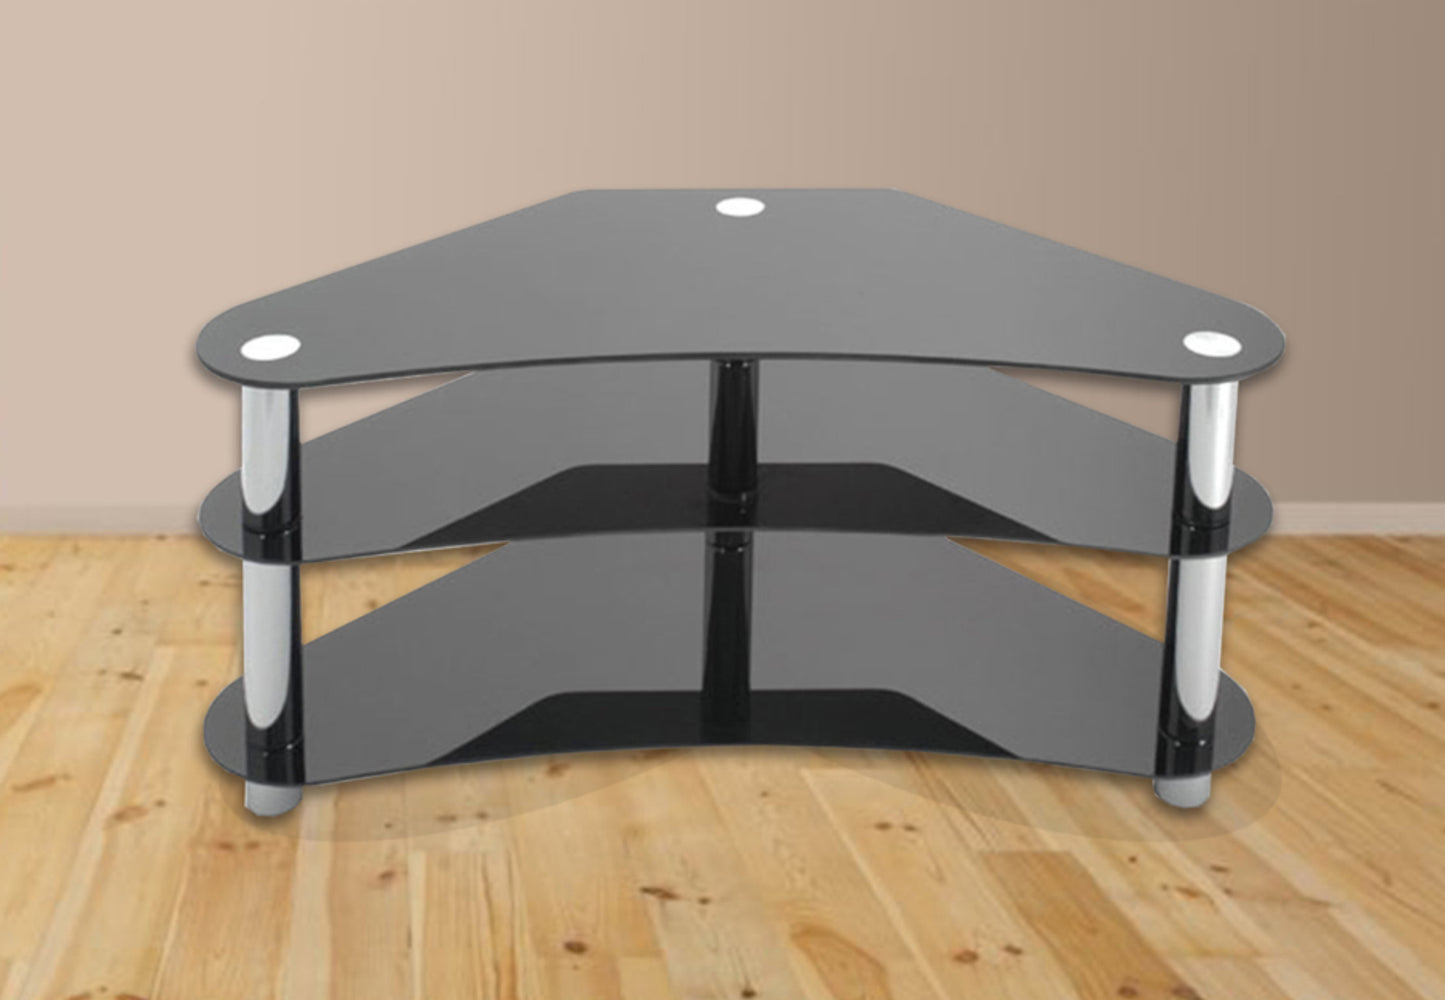 Black TV Stand with Chrome Legs and 8mm Tempered Glass